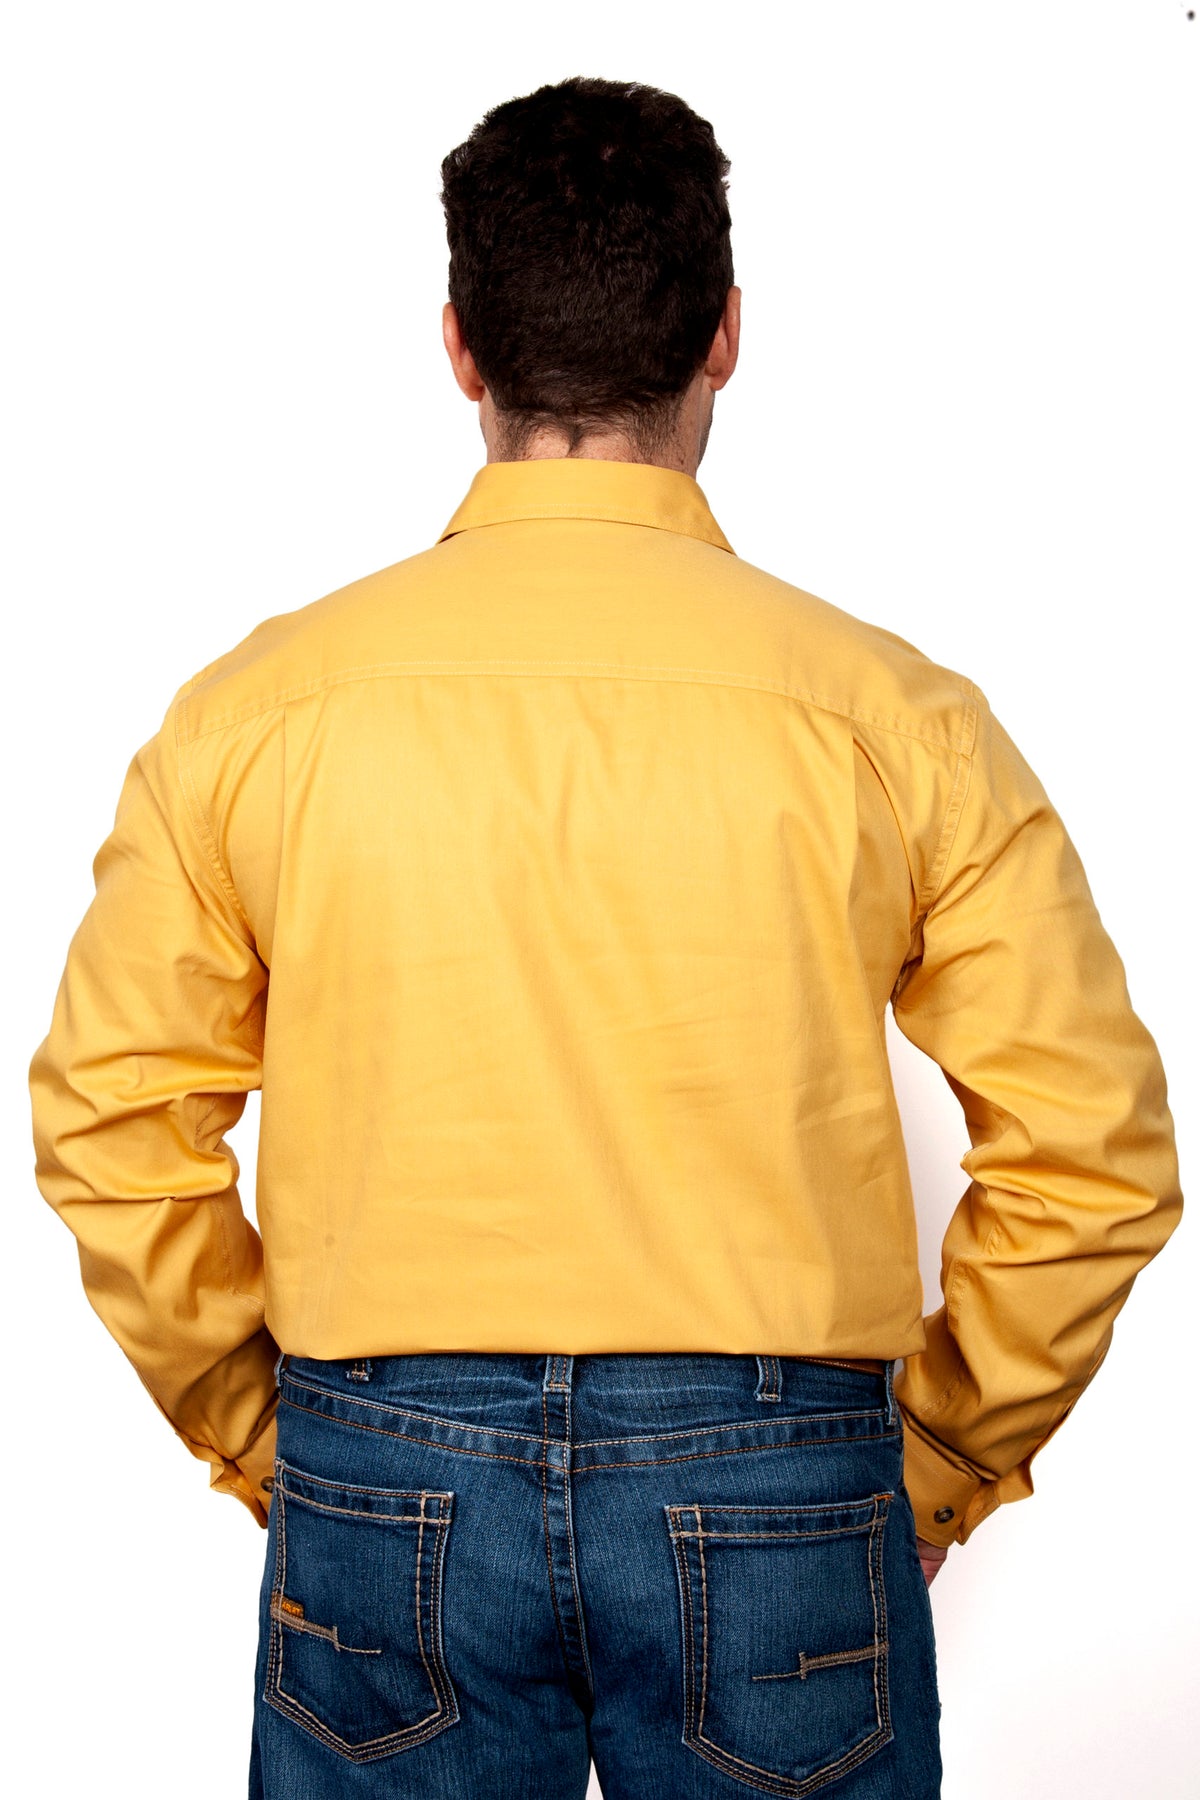 Just Country Mens Cameron Workshirt - Mustard